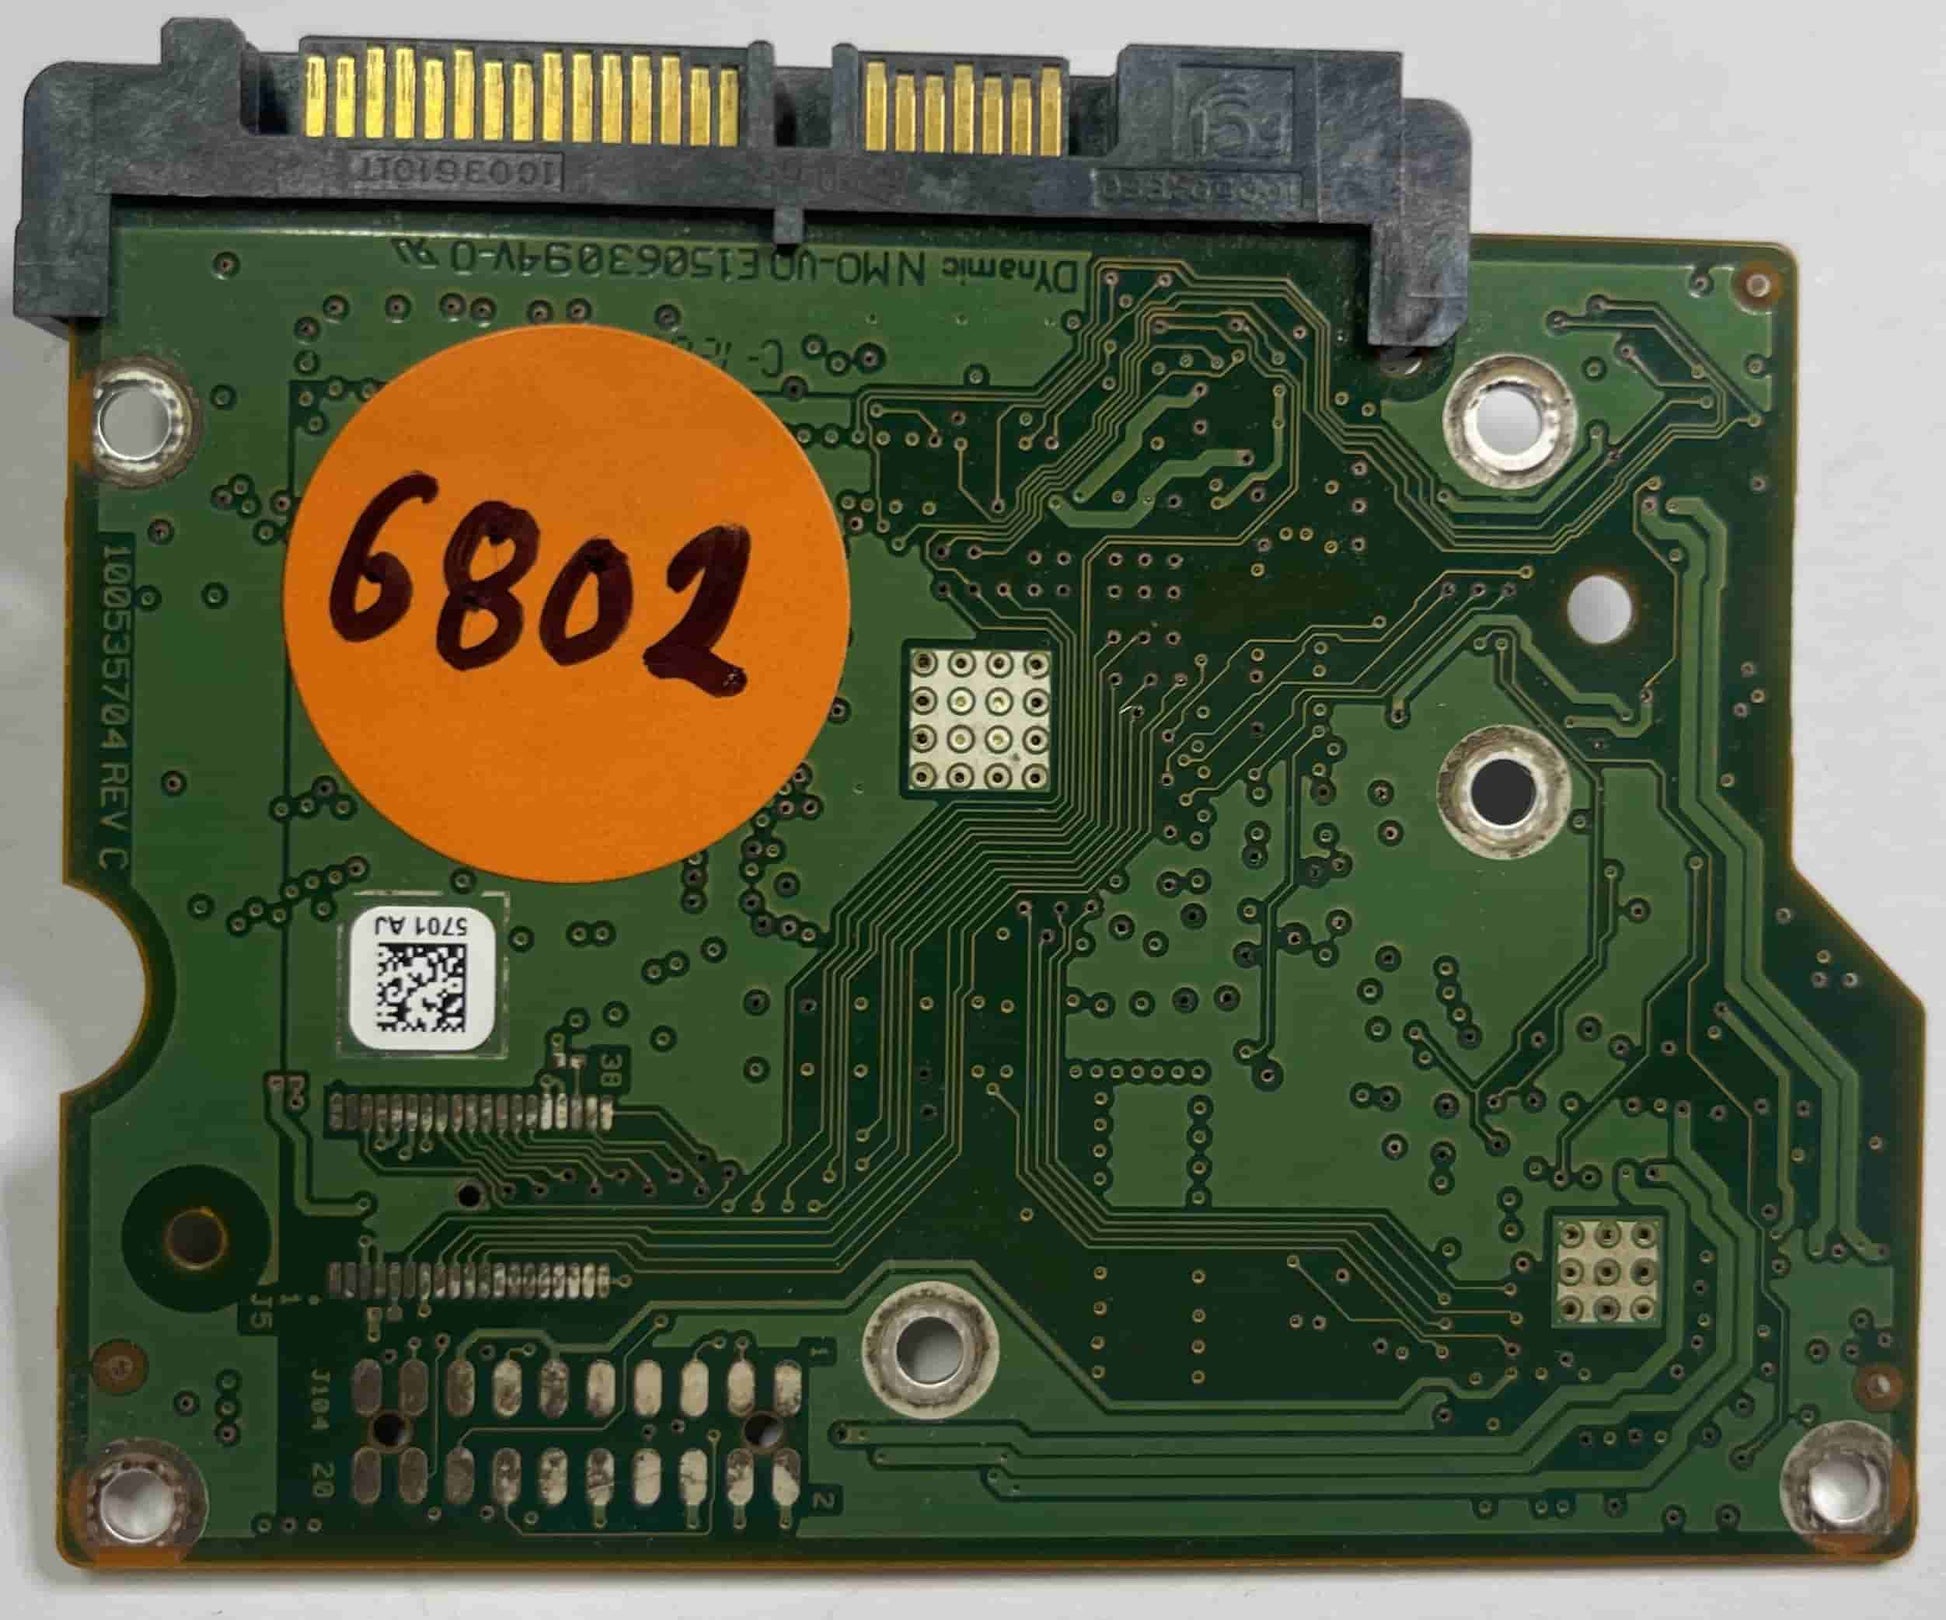 Seagate ST3500413AS 100535704 REV C 9YP142-022 PCB for Sale